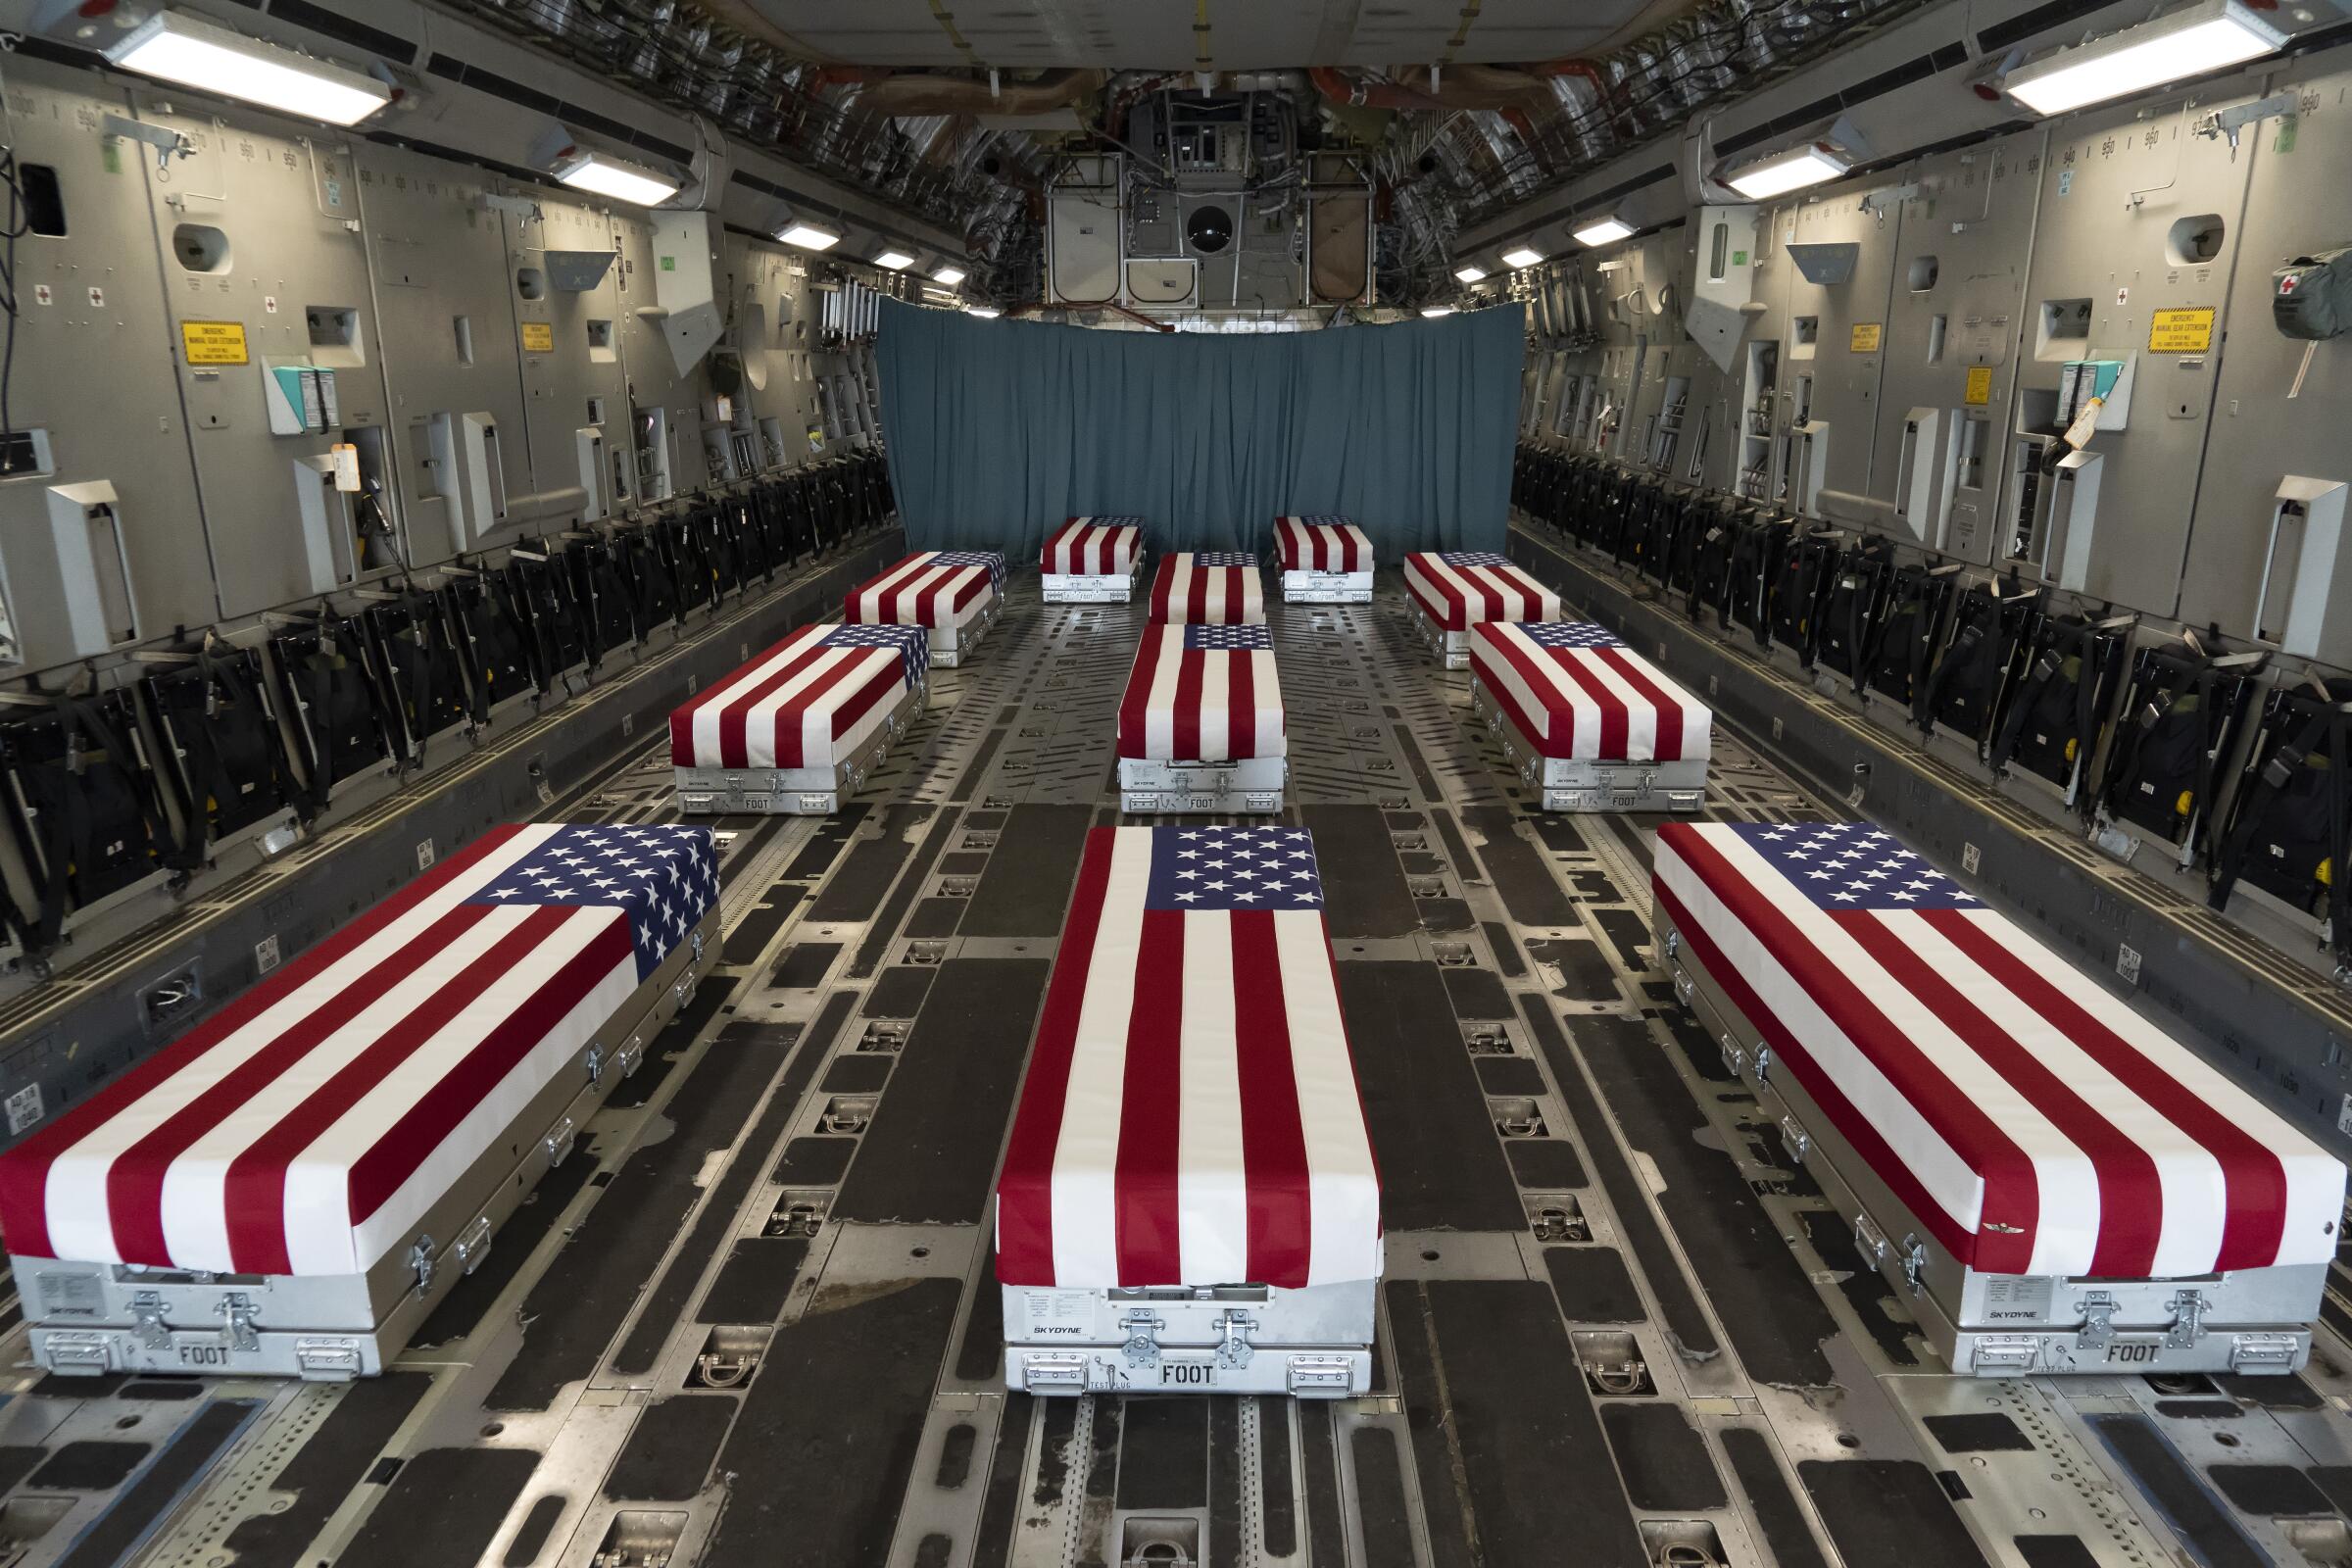 Image provided by the U.S. Air Force, flag-draped transfer cases line the inside of a transport plane.